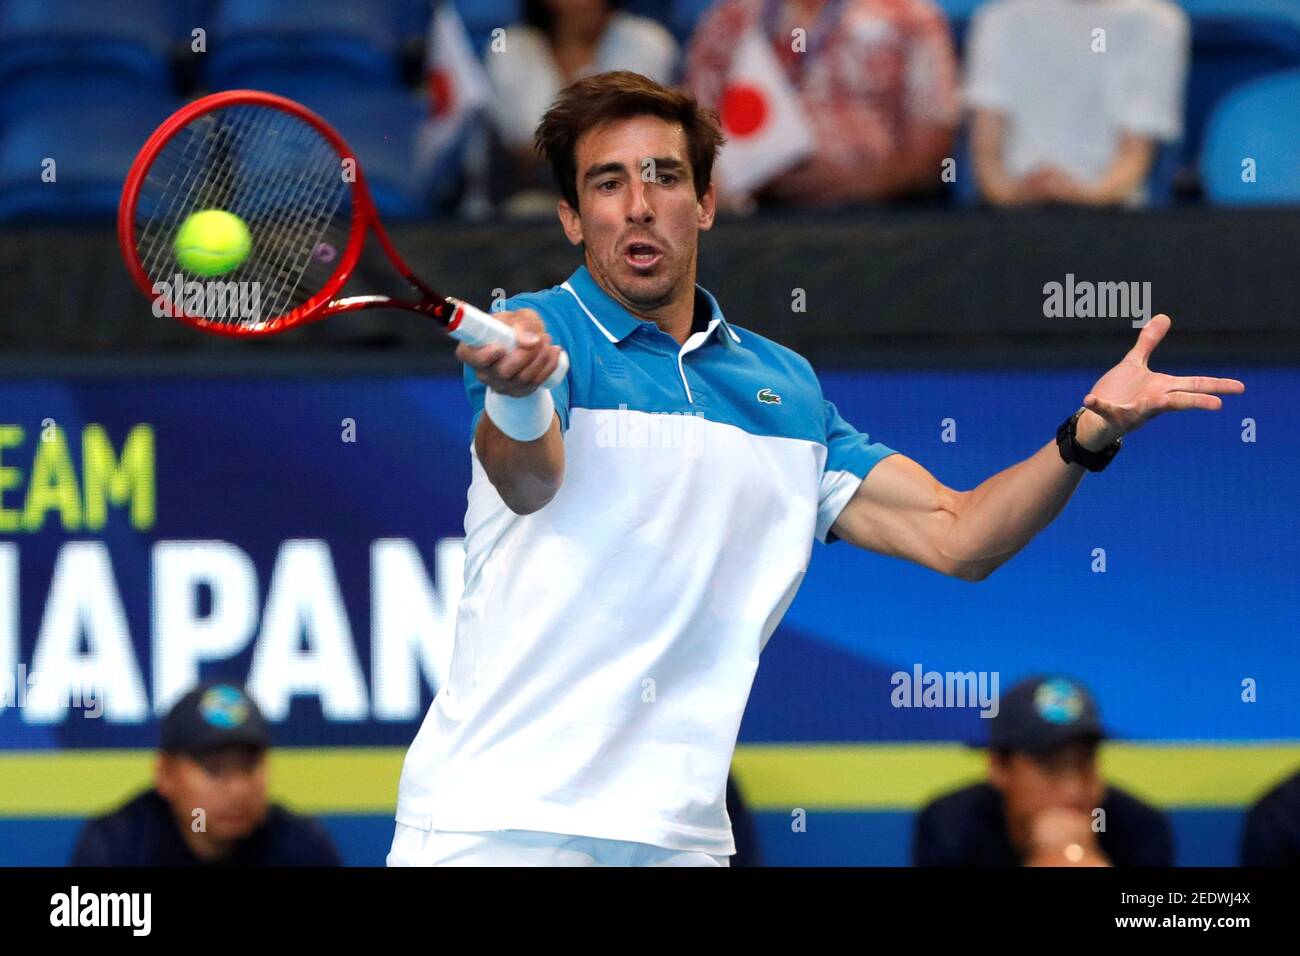 Tennis - ATP Cup - RAC Arena, Perth, Australia - January 4, 2020 Uruguay's  Pablo Cuevas in action with Ariel Behar during their Group B doubles match  against Japan's Toshihide Matsui in